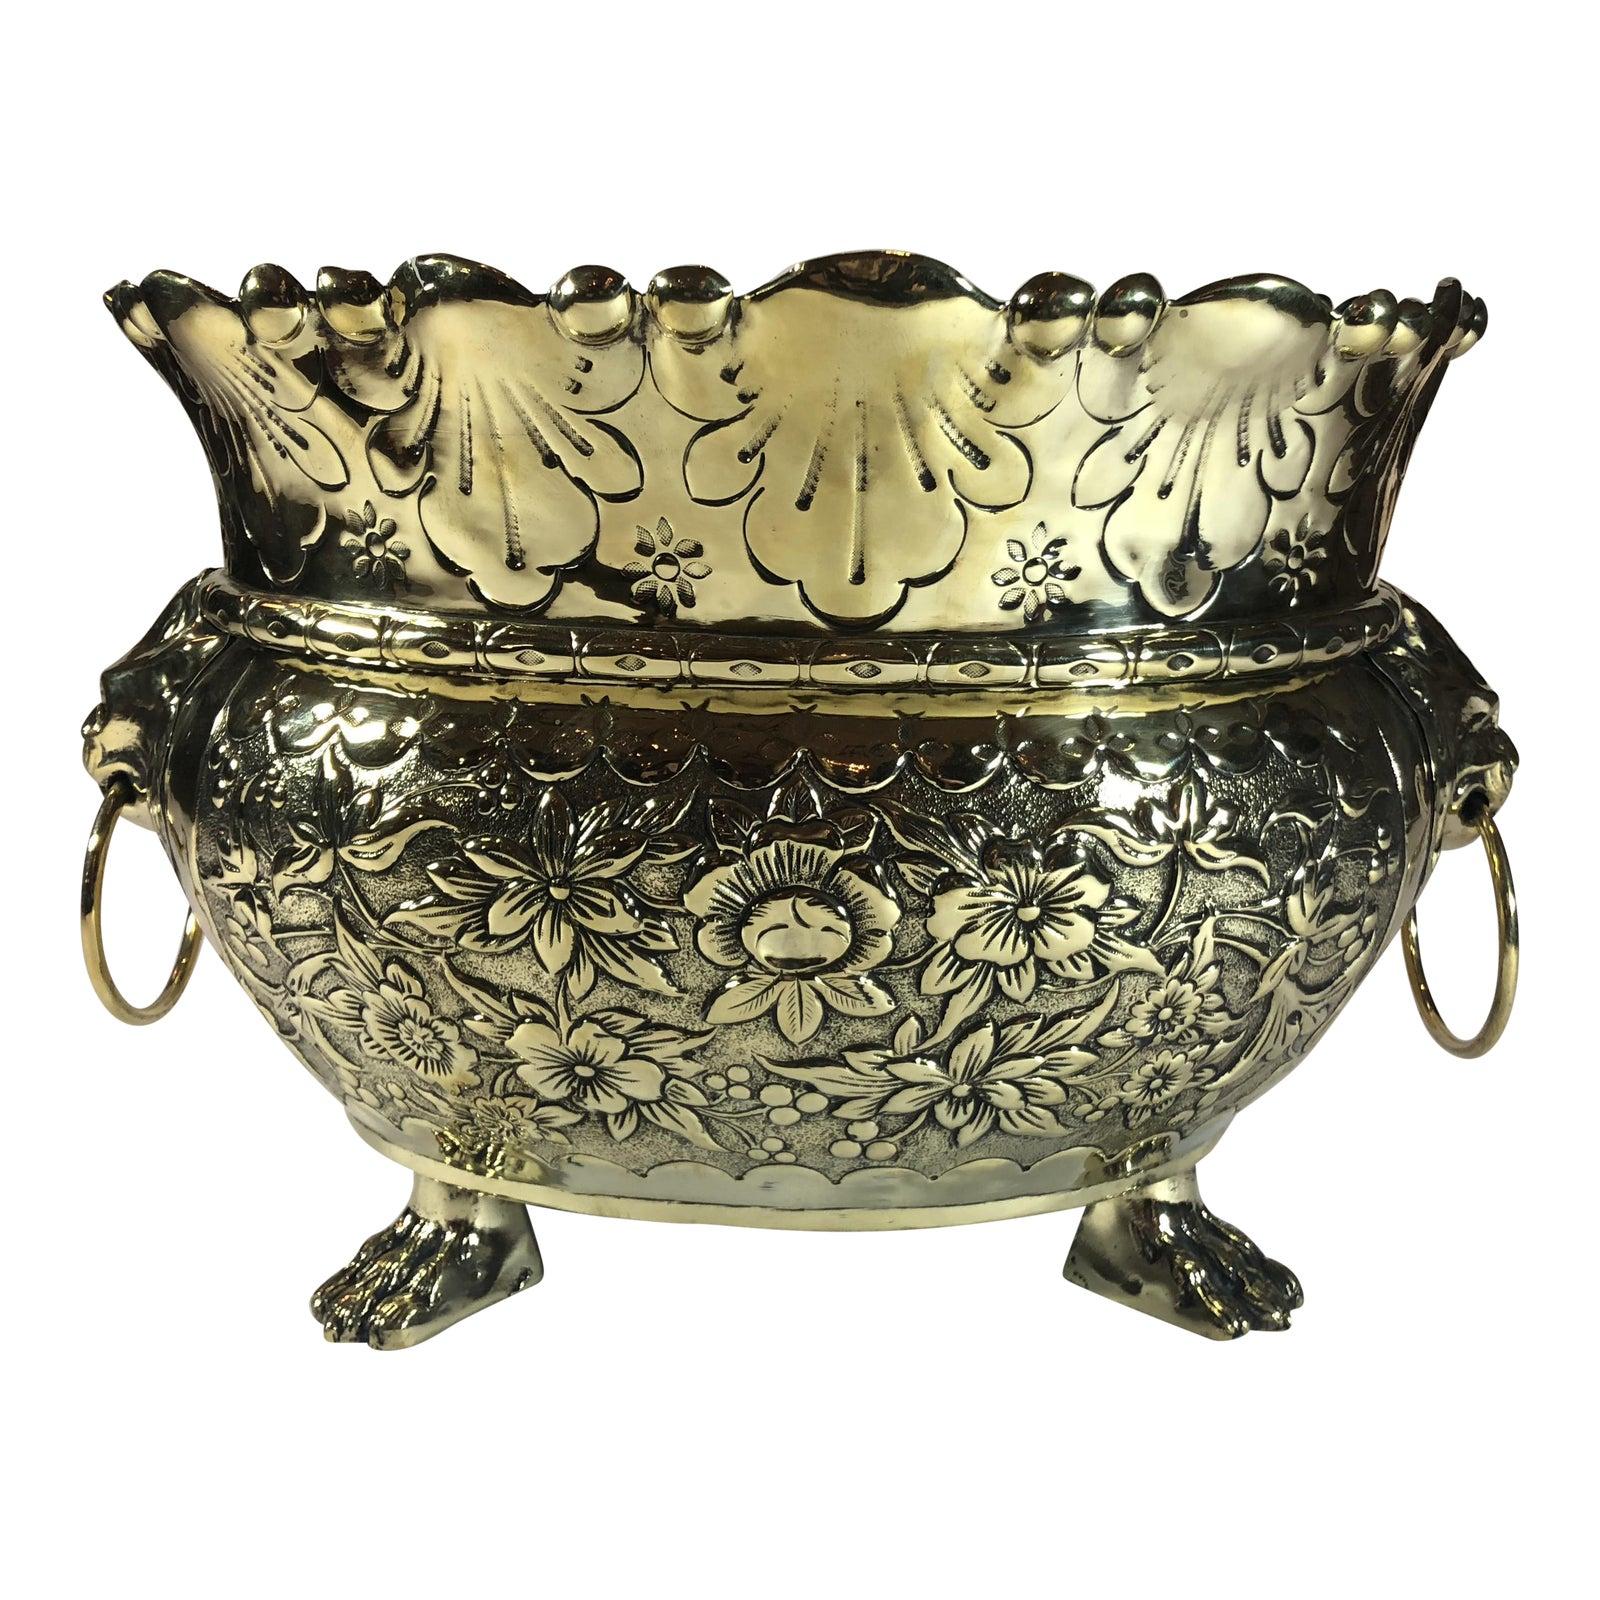 Antique Dutch Brass Repousse Jardinière with High Sides, circa 1860 In Good Condition For Sale In New Orleans, LA